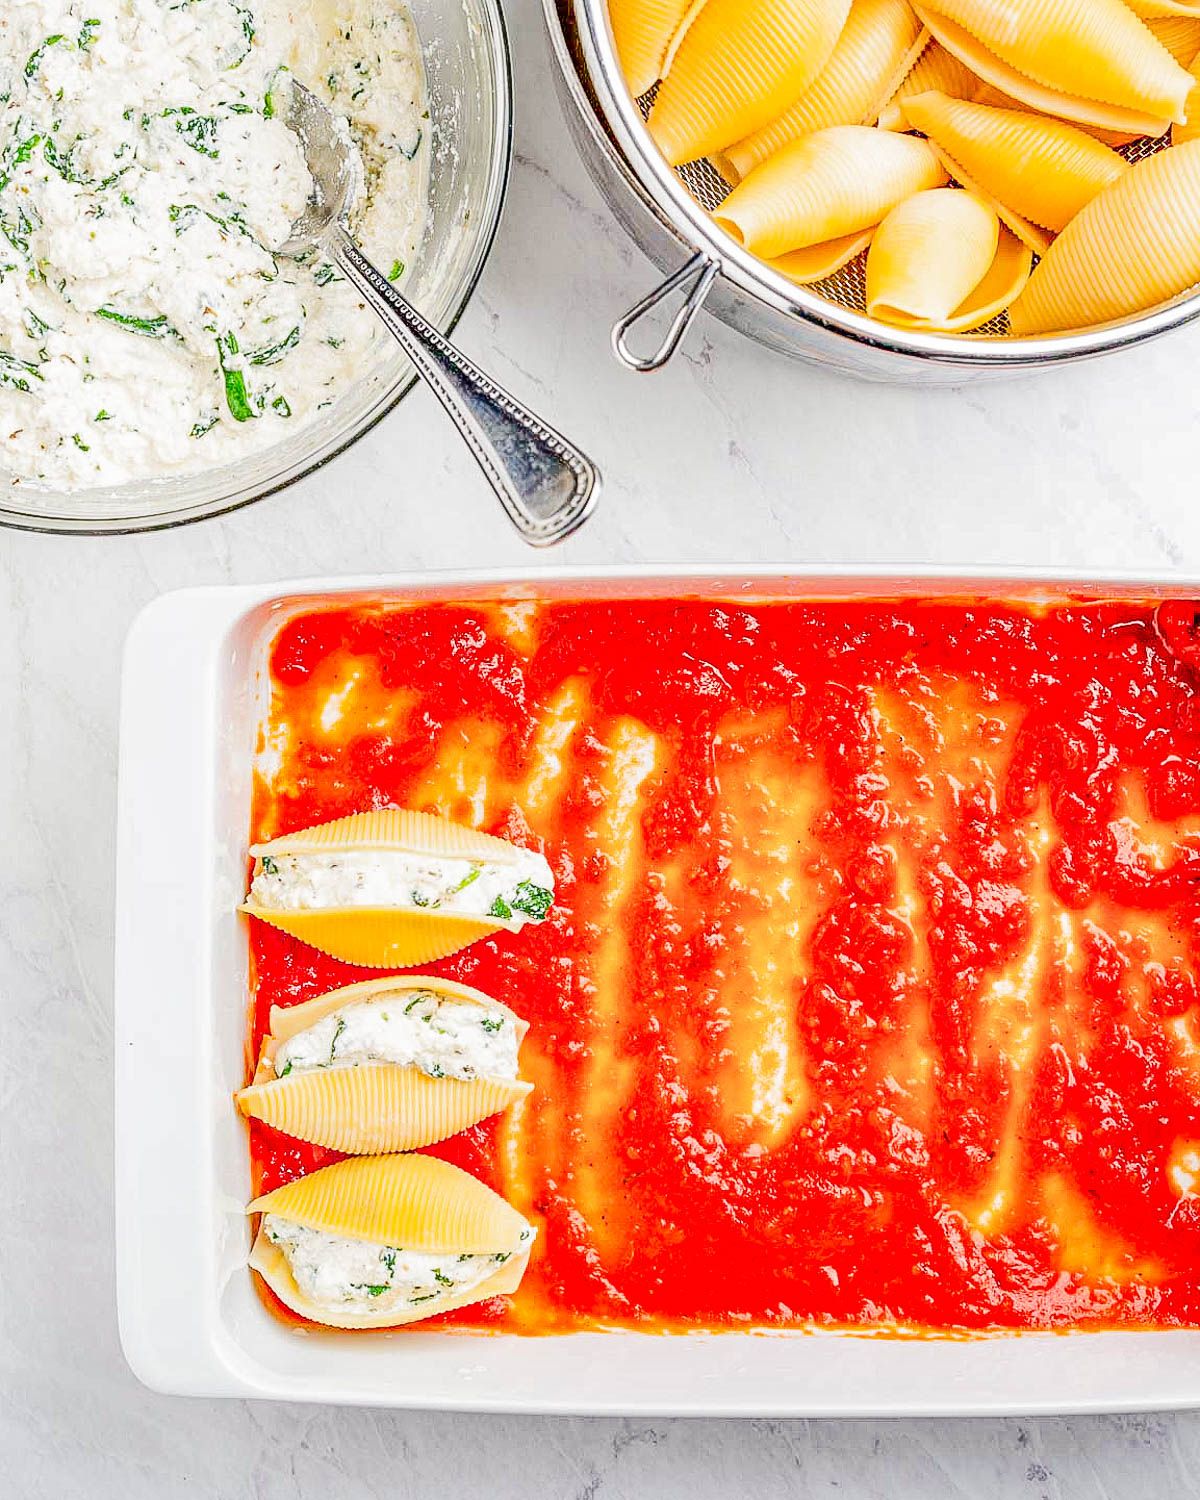 Preparation of stuffed pasta shells with ricotta filling and tomato sauce.